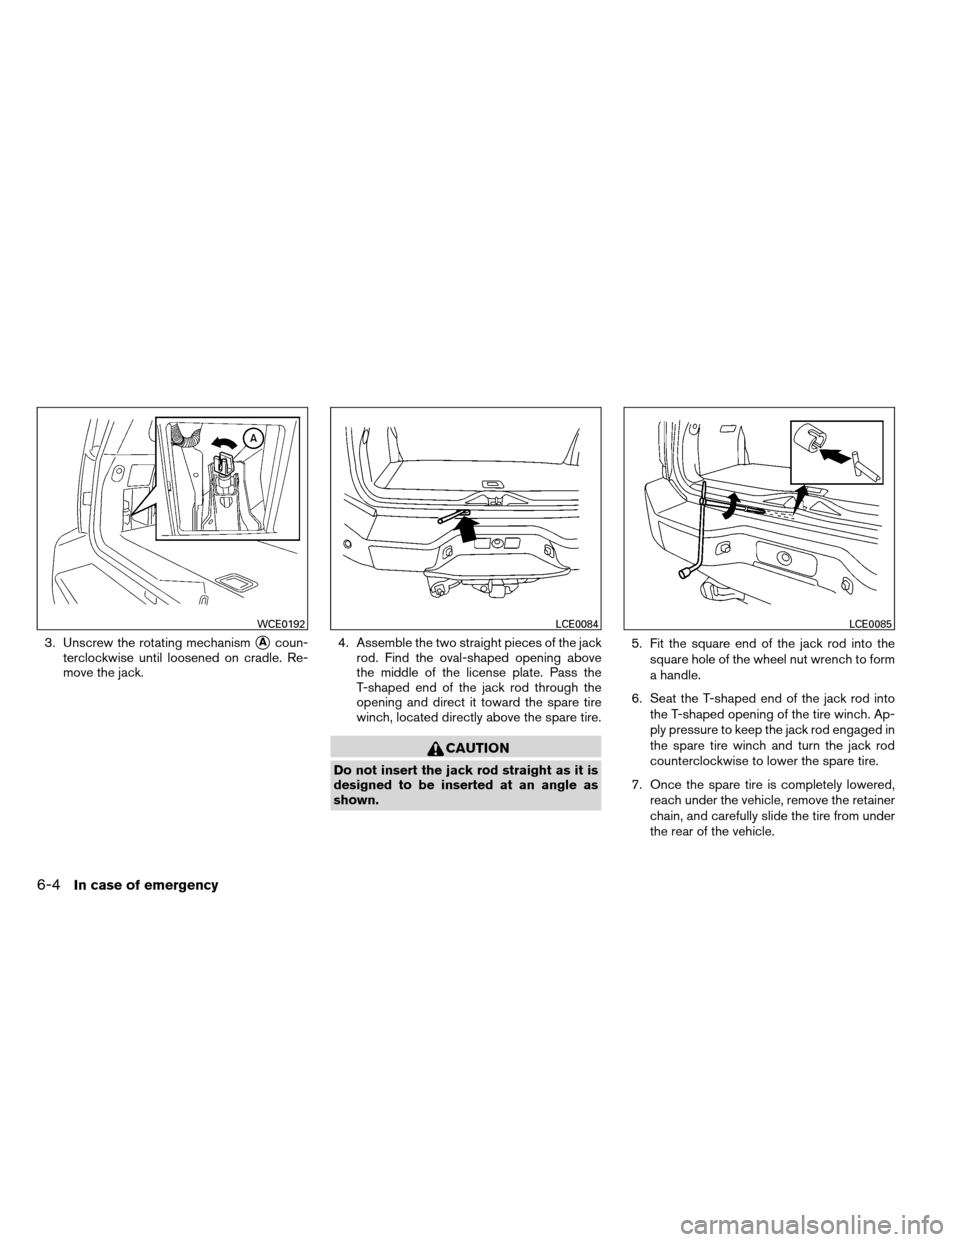 NISSAN ARMADA 2012 1.G Owners Manual 3. Unscrew the rotating mechanismAcoun-
terclockwise until loosened on cradle. Re-
move the jack. 4. Assemble the two straight pieces of the jack
rod. Find the oval-shaped opening above
the middle of